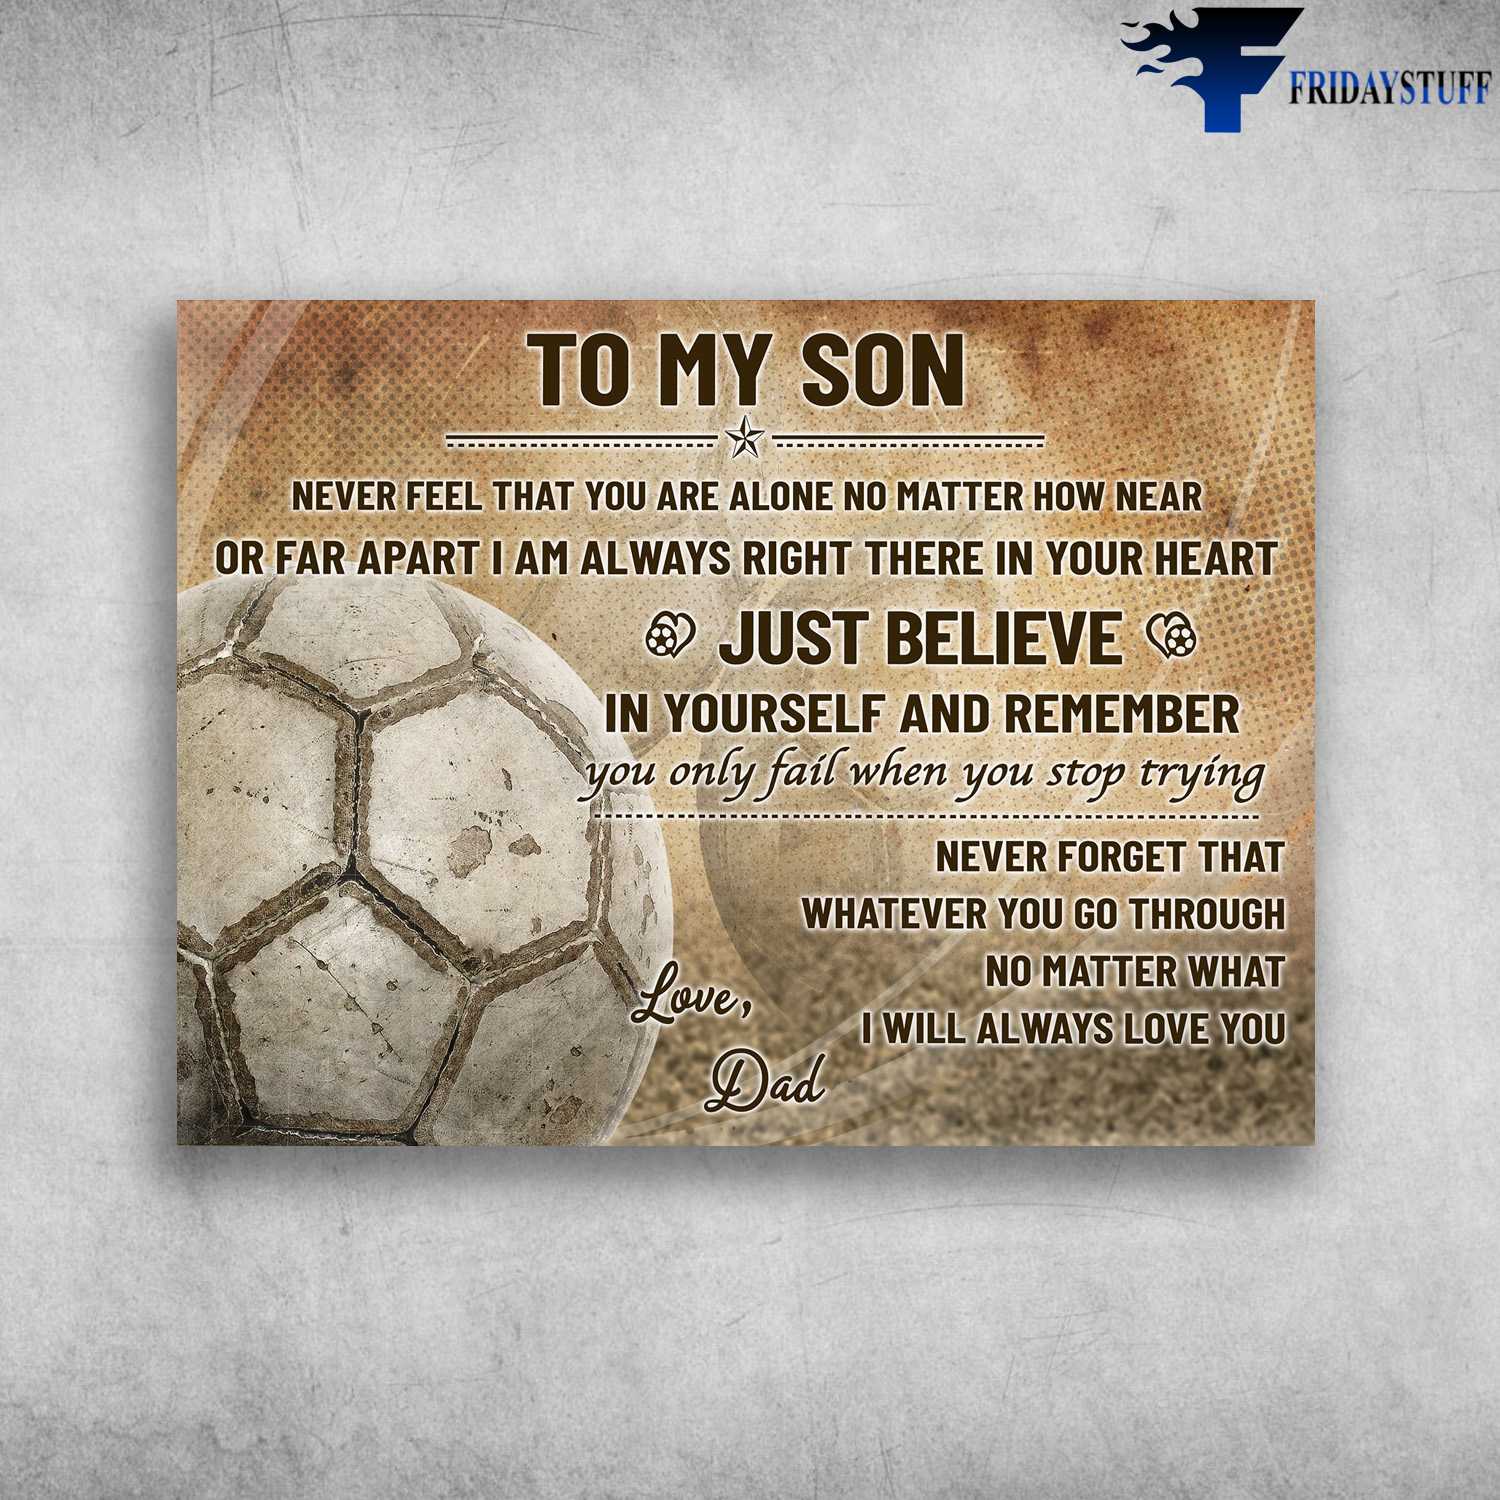 Dad And Son, Football Lover - To My Son, Never Feel That, You Are Alone, No Matter How Near, Or Far Apart I Am, Always Right There In Your HEart, Just Believe, In Yourself And Remember